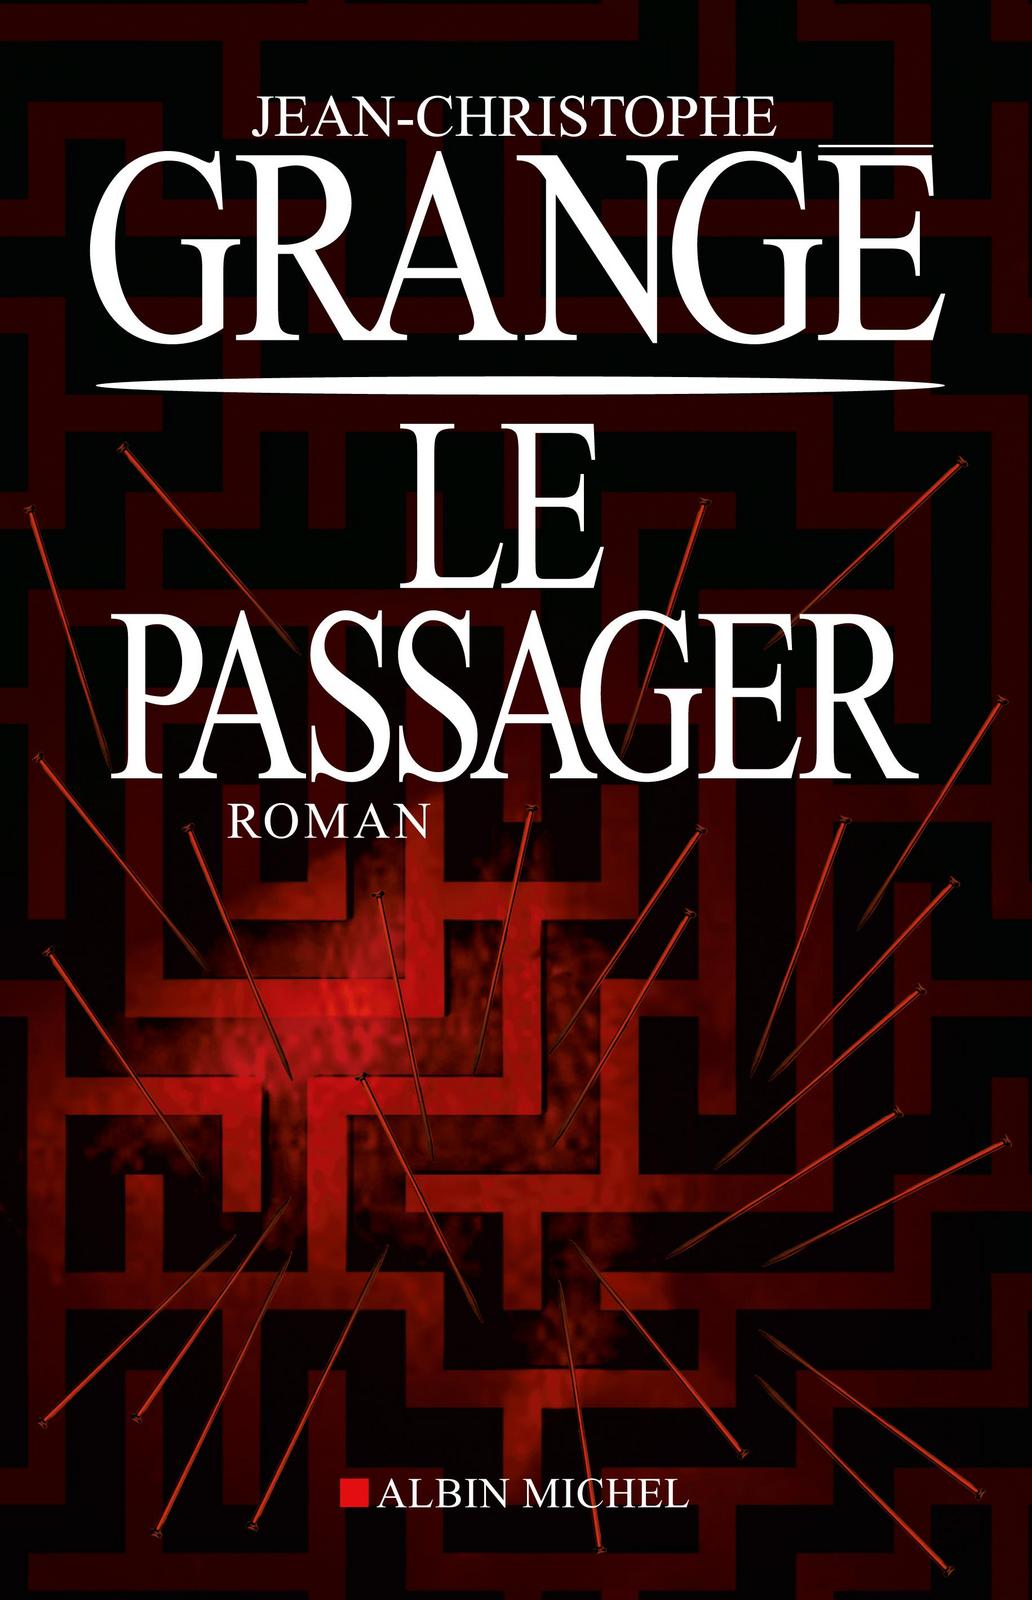 Le passager (French language, 2011)